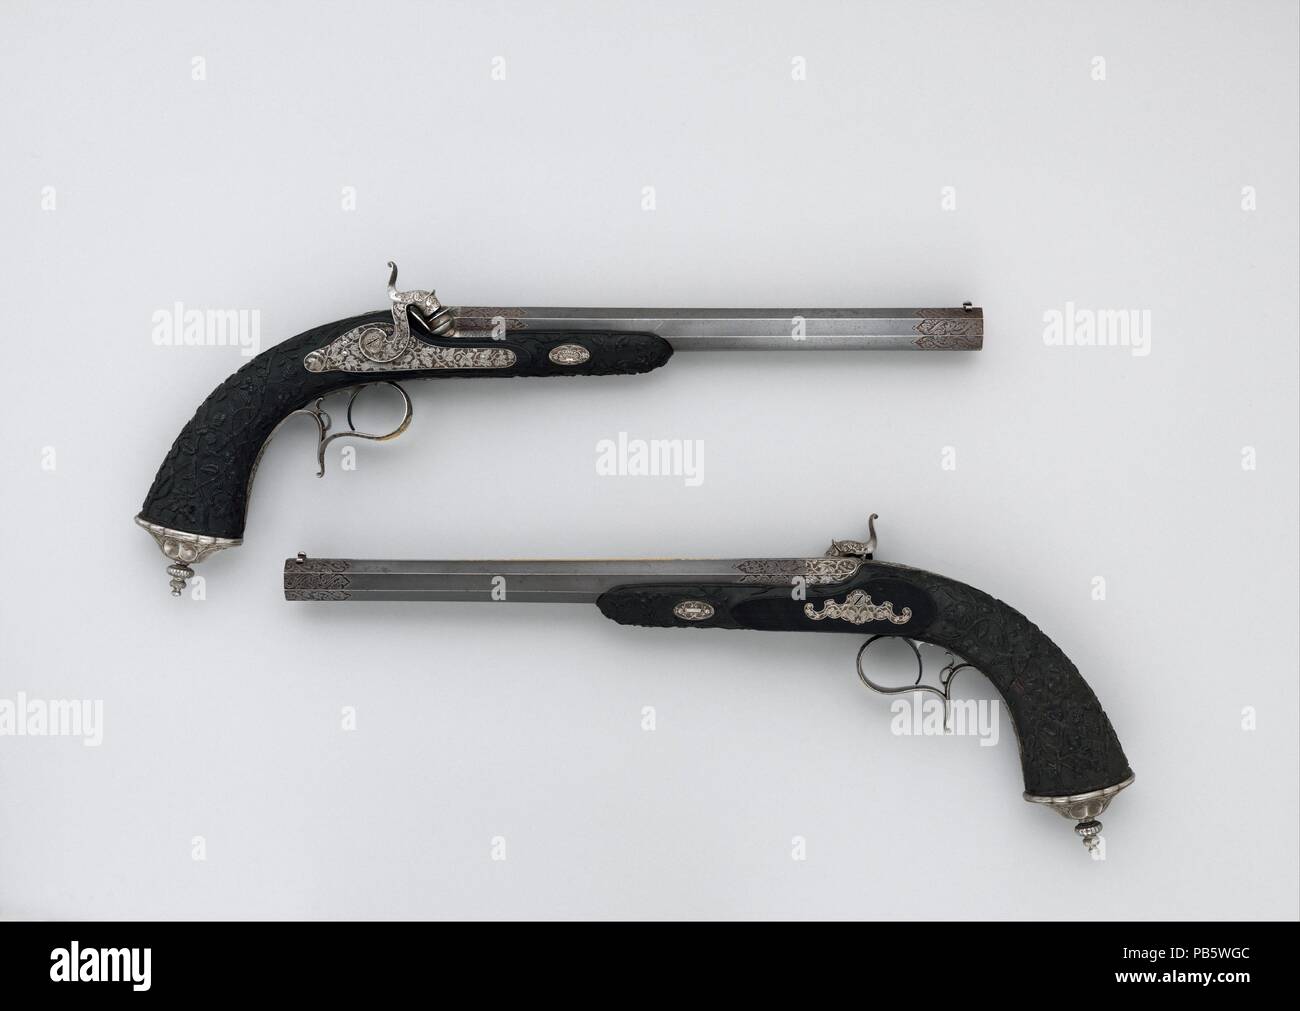 Cased Pair of Percussion Pistols with Accessories. Culture: French, Paris. Dimensions: Pistols (a, b); L. of each 16 in. (40.7 cm); L. of each barrel 10 5/8 in. (27 cm); Cal. of each .46 in. (12 mm); Wt. of each 2 lb. 3 oz. (992.2 g); ramrod (c); L. 11 1/4 in. (28.6 cm); Wt. 1.5 oz. (42.5 g); cleaning rod (d); L. 12 3/8 in. (31.4 cm); Wt. 1.8 oz. (51 g); mallet (e); L. 7 7/8 in. (20 cm); W. 2 1/2 in. (6.4 cm); Wt. 5.3 oz. (150.3 g); screwdriver (f); L. 6 1/4 in. (15.9 cm); Wt. 2.6 oz. (73.7 g); bullet mould (g); L. 7 7/8 in. (20 cm); Wt. 8.8 oz. (249.5 g); powder flask (h); H. 4 in. (10.2 cm); Stock Photo